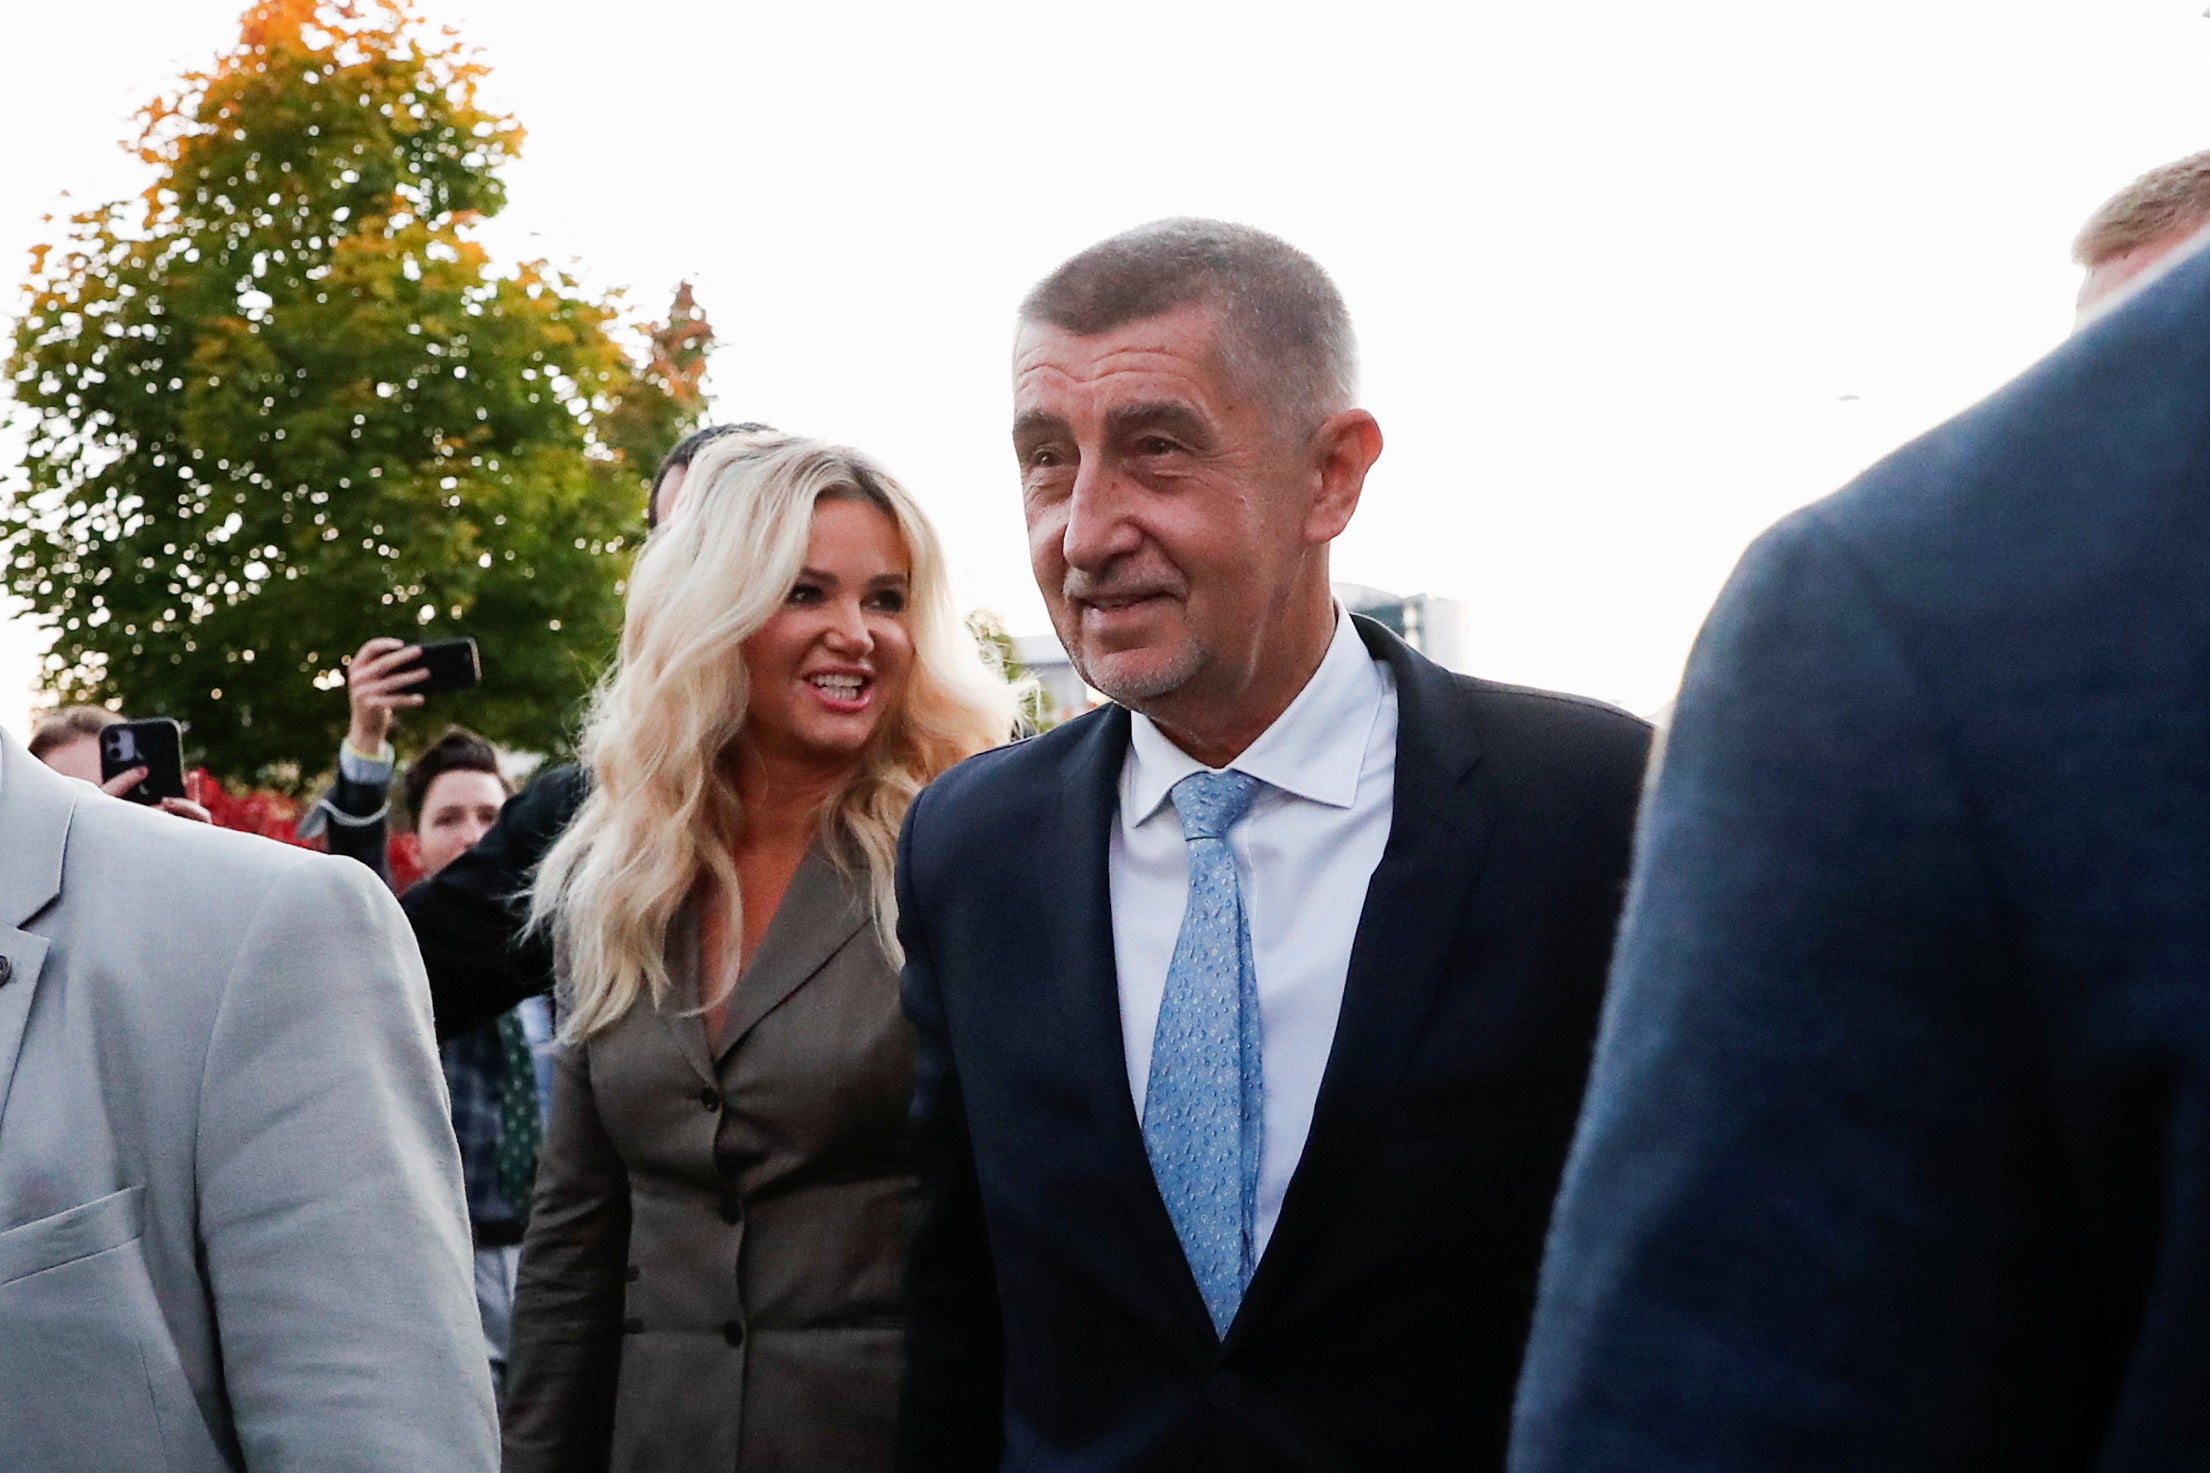 Czech prime minister and leader of ANO party Andrej Babis and his wife Monika Babisova